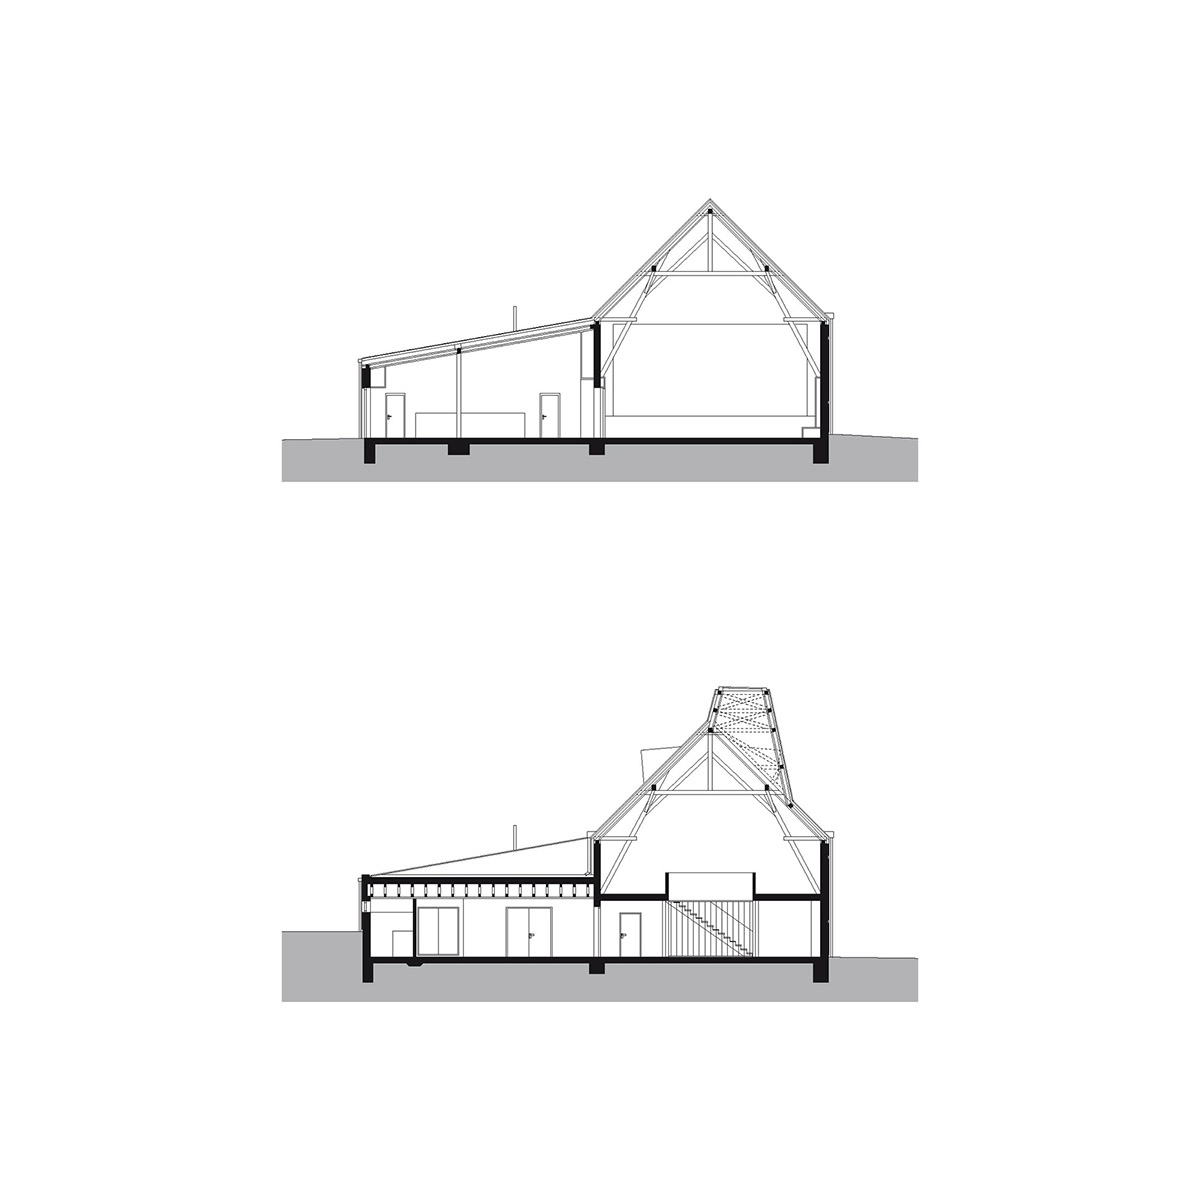 7_Information_and_Cultural_Center_Pist_knesl_kyncl_architects_03_sections.jpg